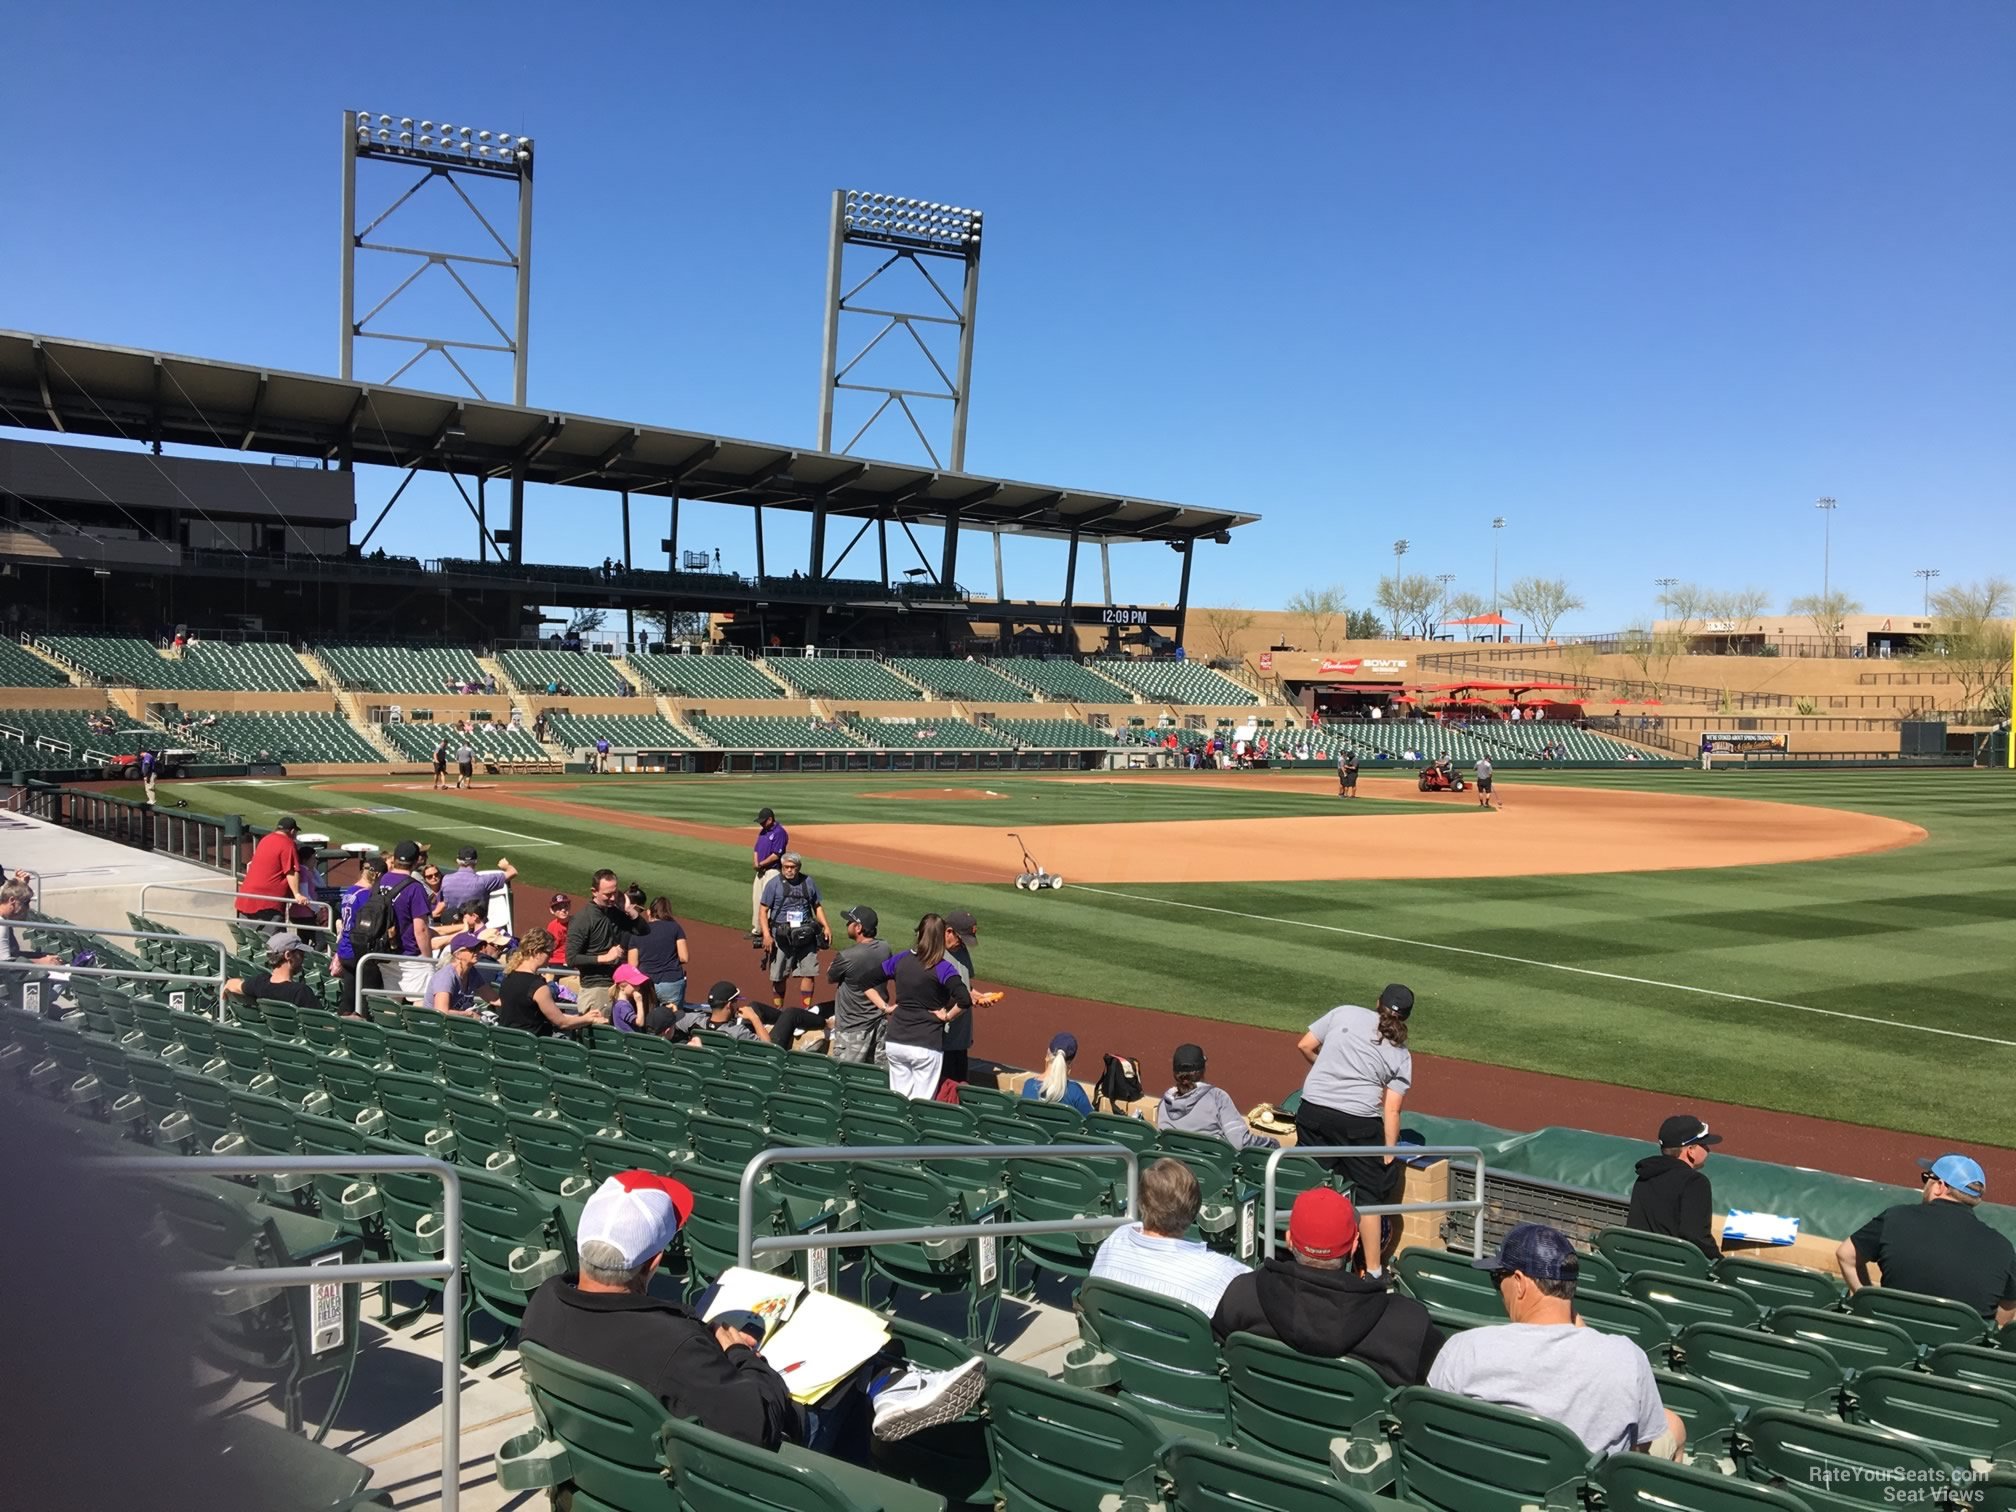 section 102, row 10 seat view  - salt river field at talking stick